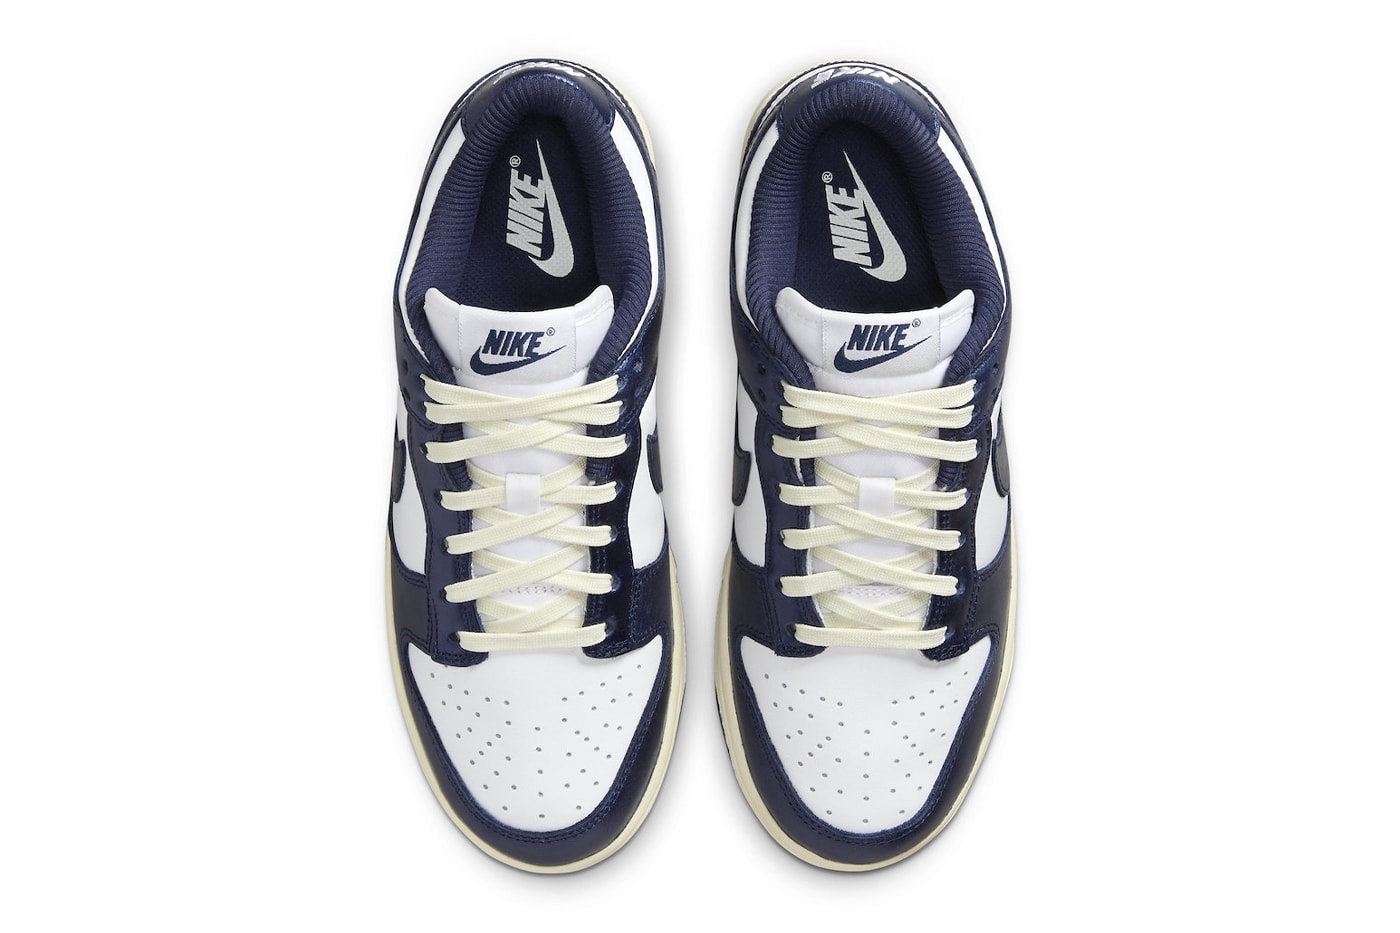 Nike Dunk Low Surfaces in "Vintage Navy" FN7197-100 White/Midnight Navy-Coconut Milk swoosh low-top typical everyday shoes